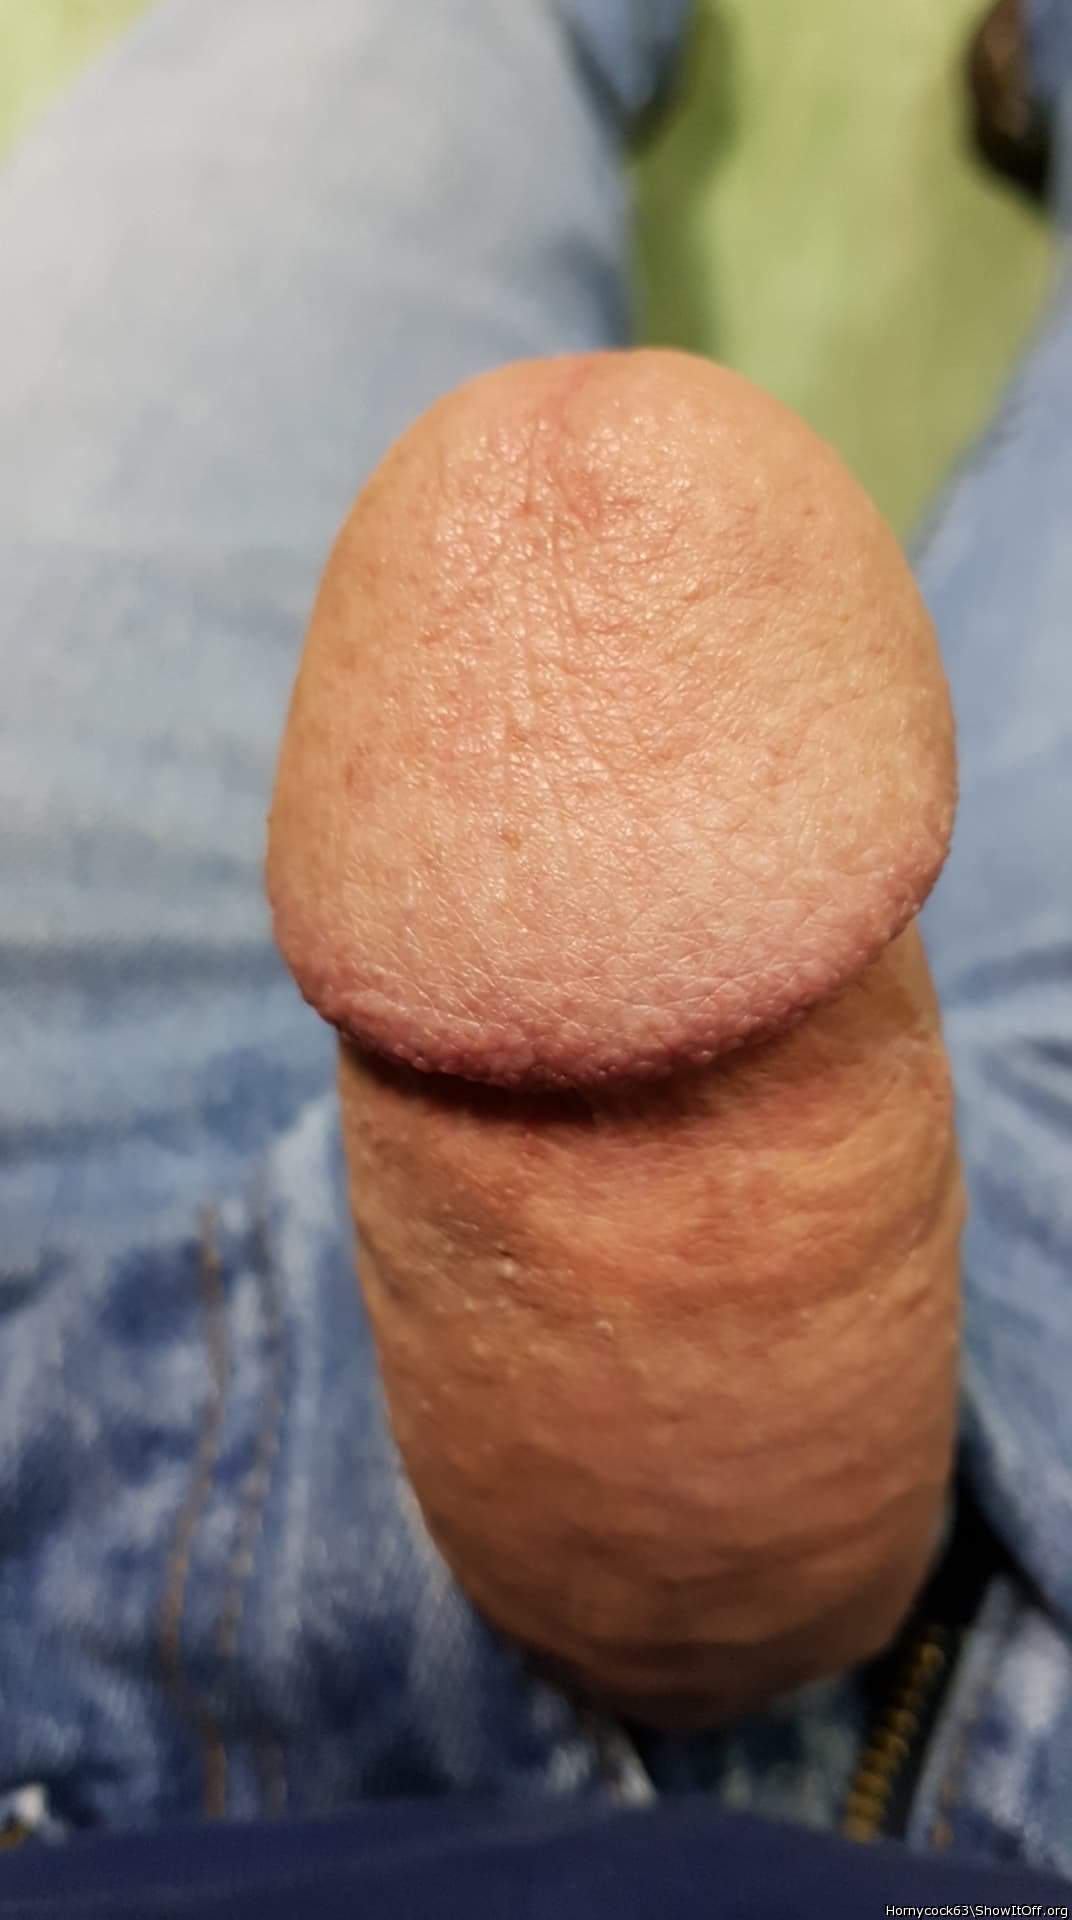 Photo of a schlong from Hornycock63